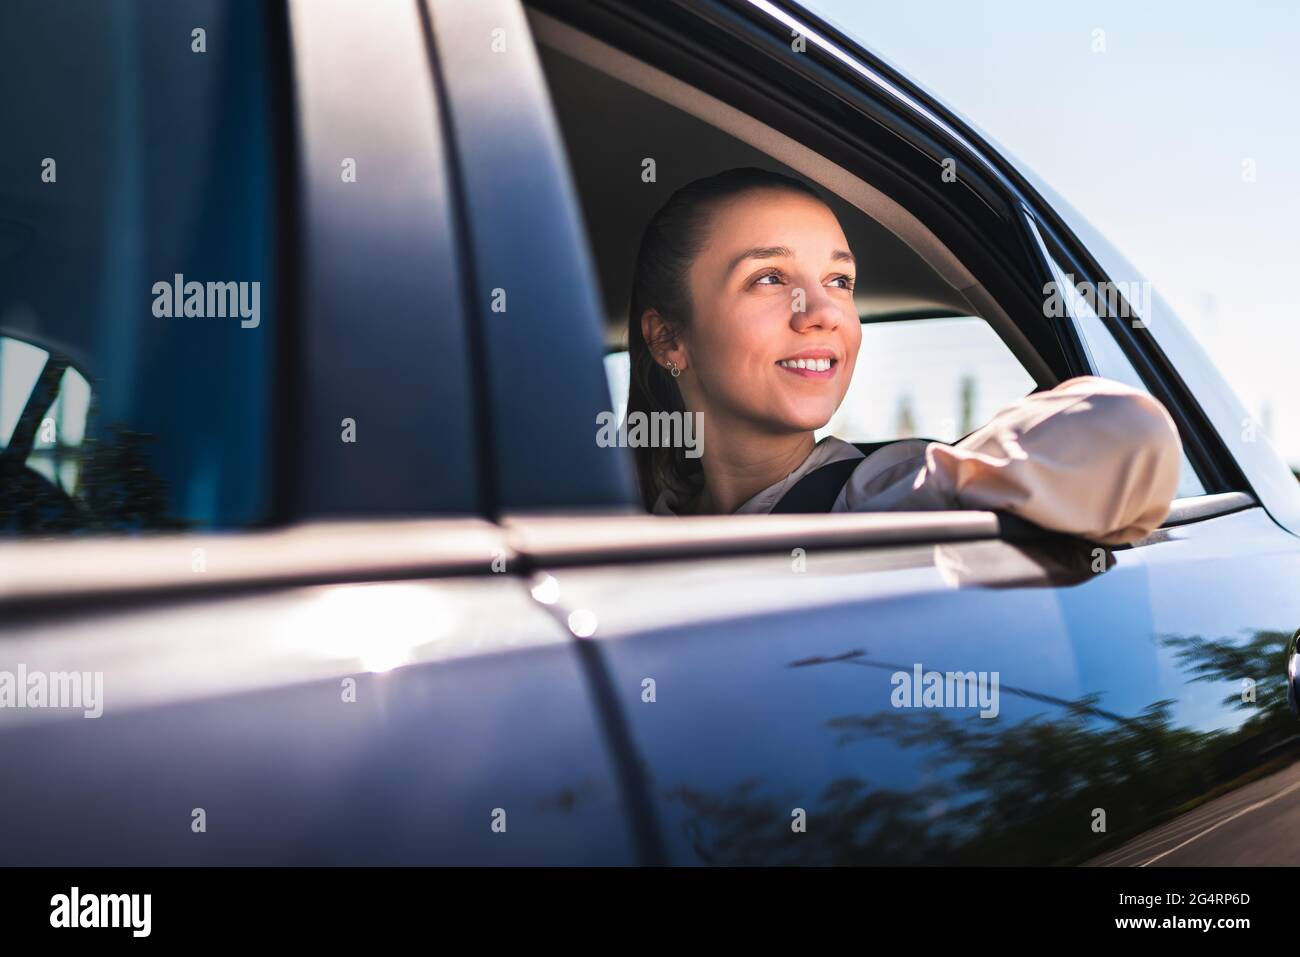 Passenger in taxi or woman in car sitting on the backseat looking outside the window. Happy female customer in cab. Elegant smiling businesswoman. Stock Photo